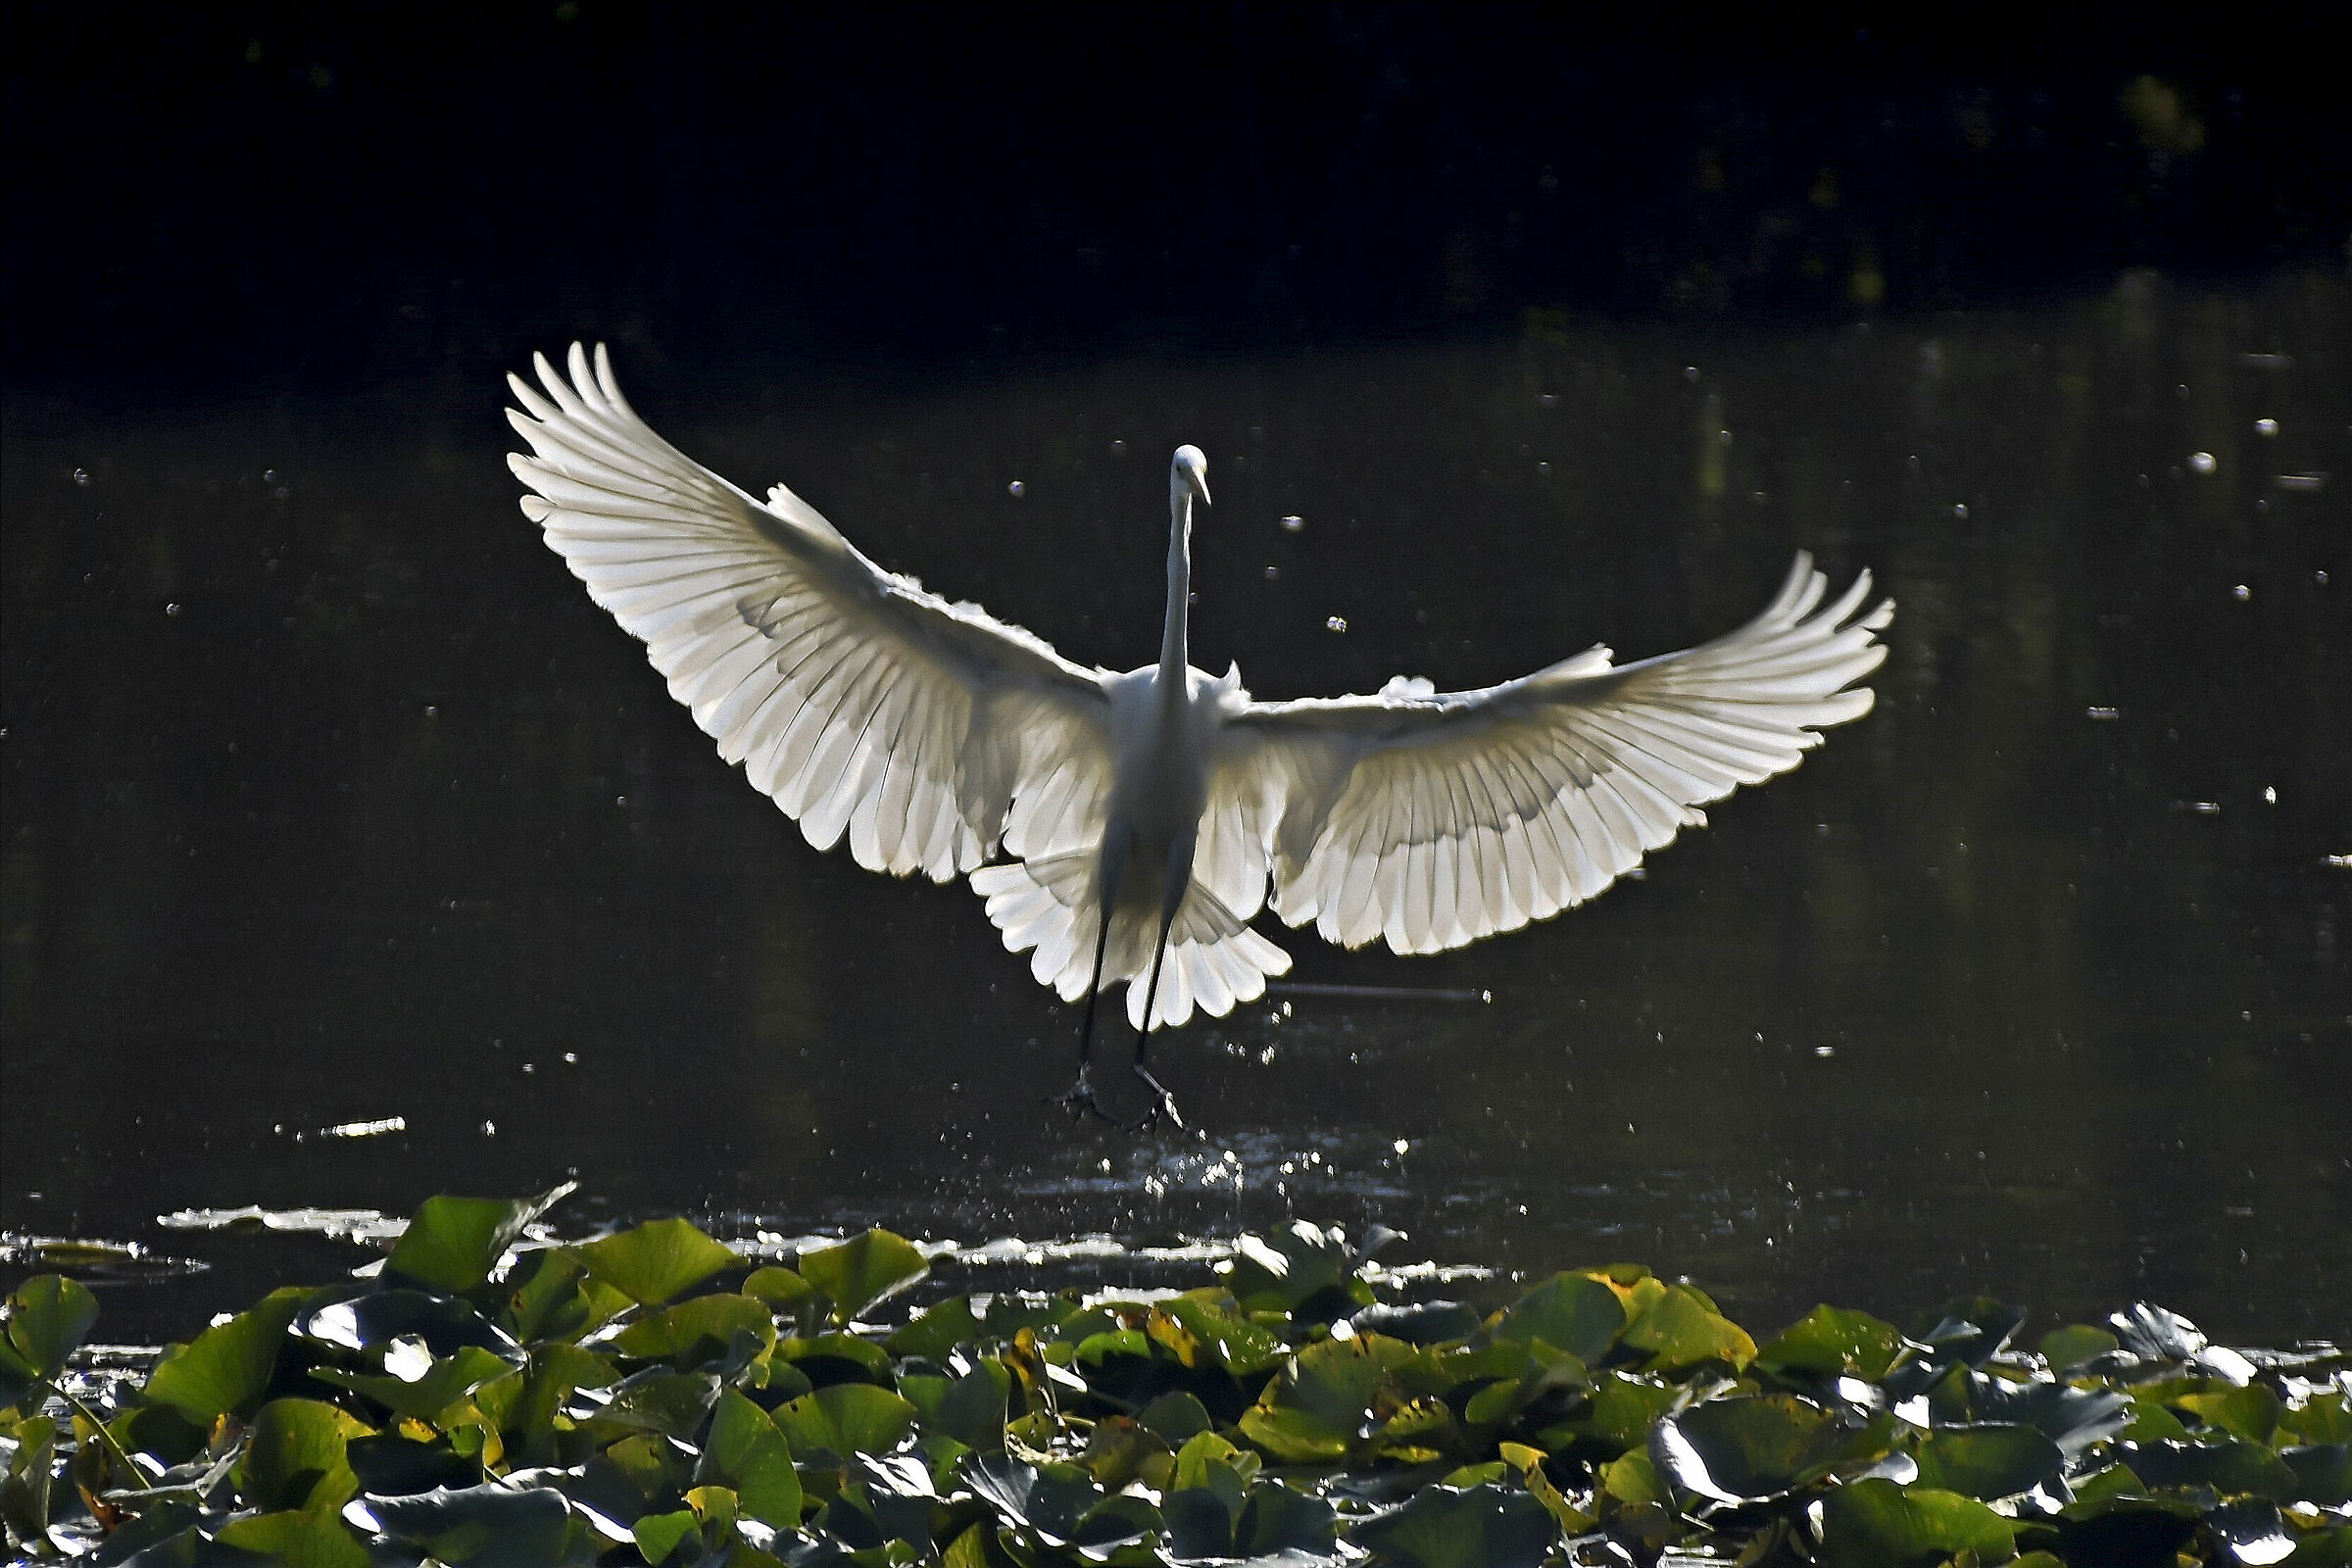 backlight of the greater white heron...